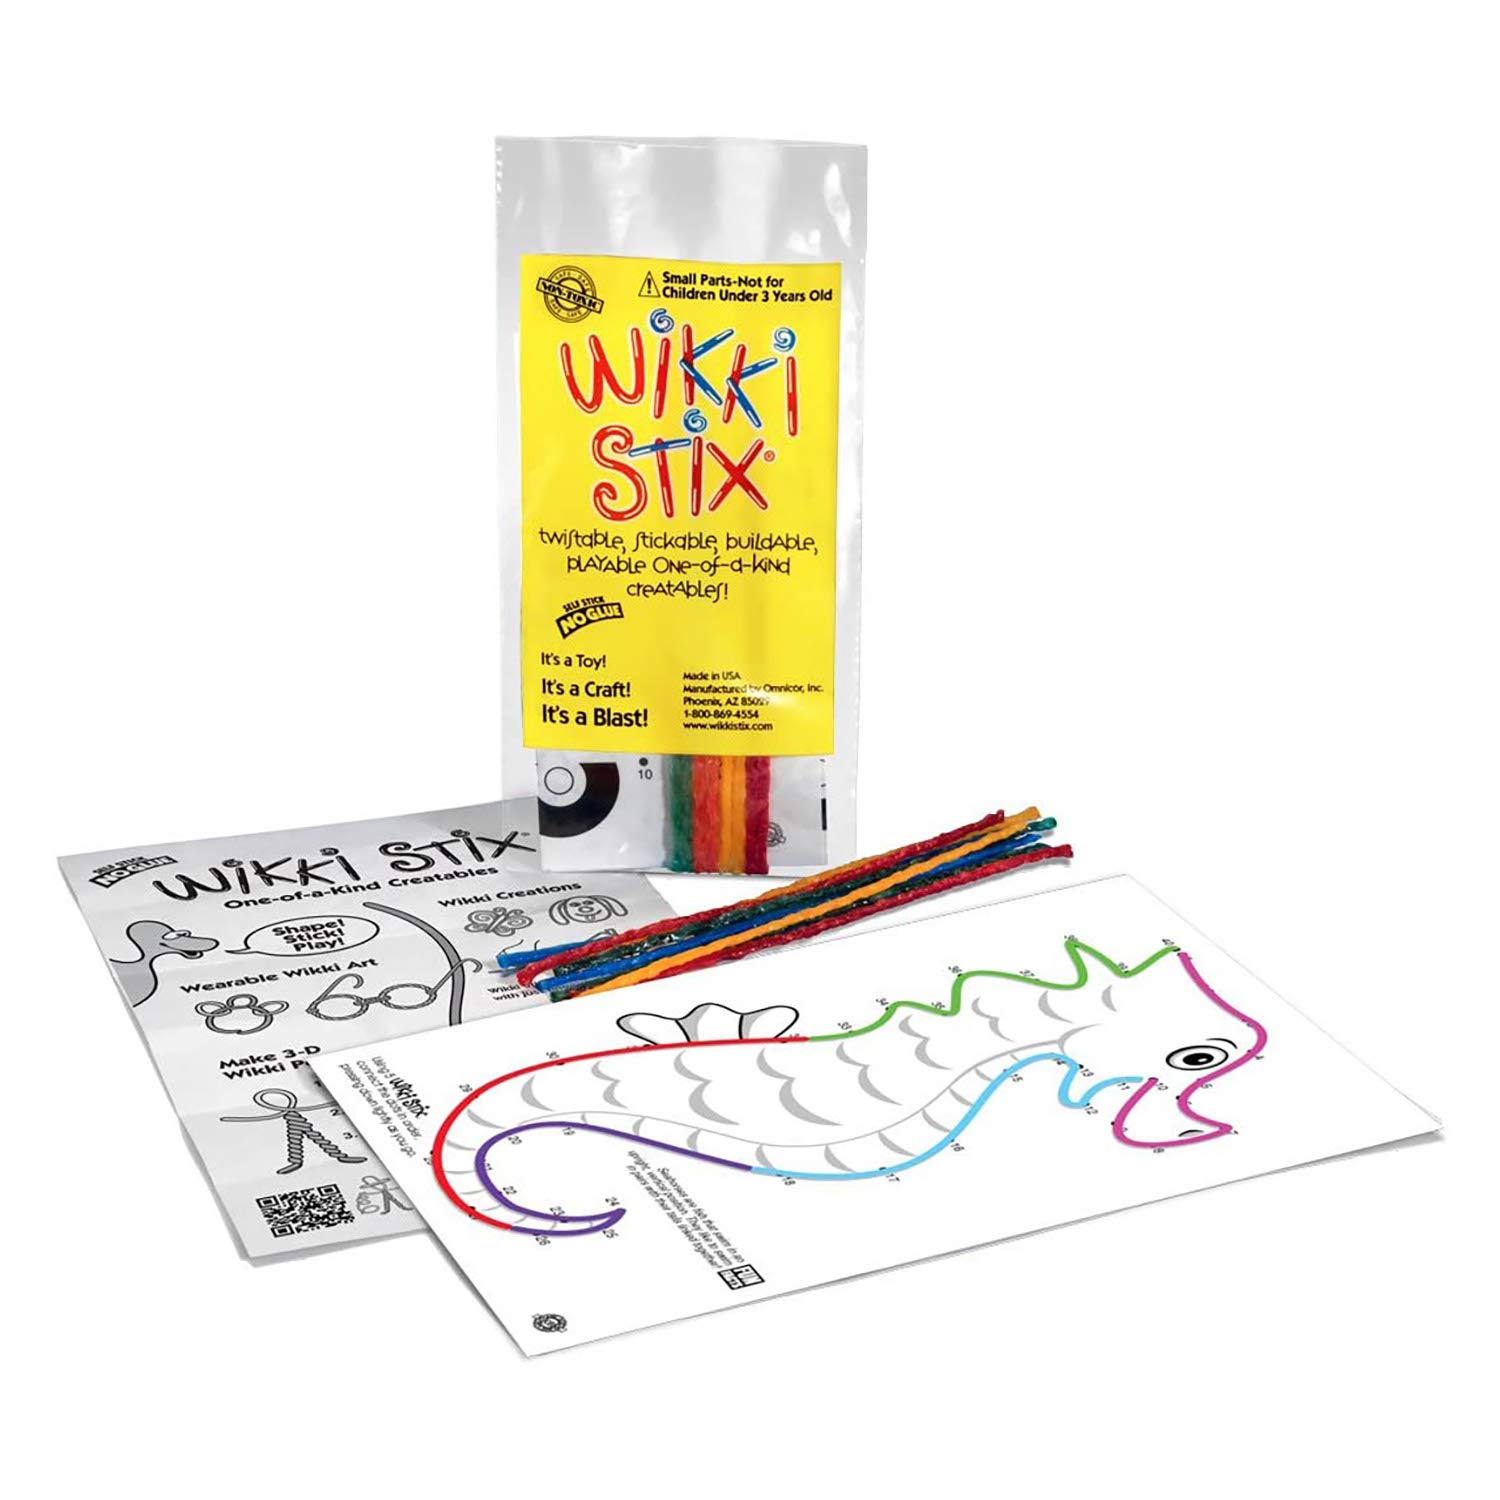 WikkiStix Sea Life Pak Features 12 Sea Creatures with Hands-on Activity and Fun Fact on Each, Made in The USA!